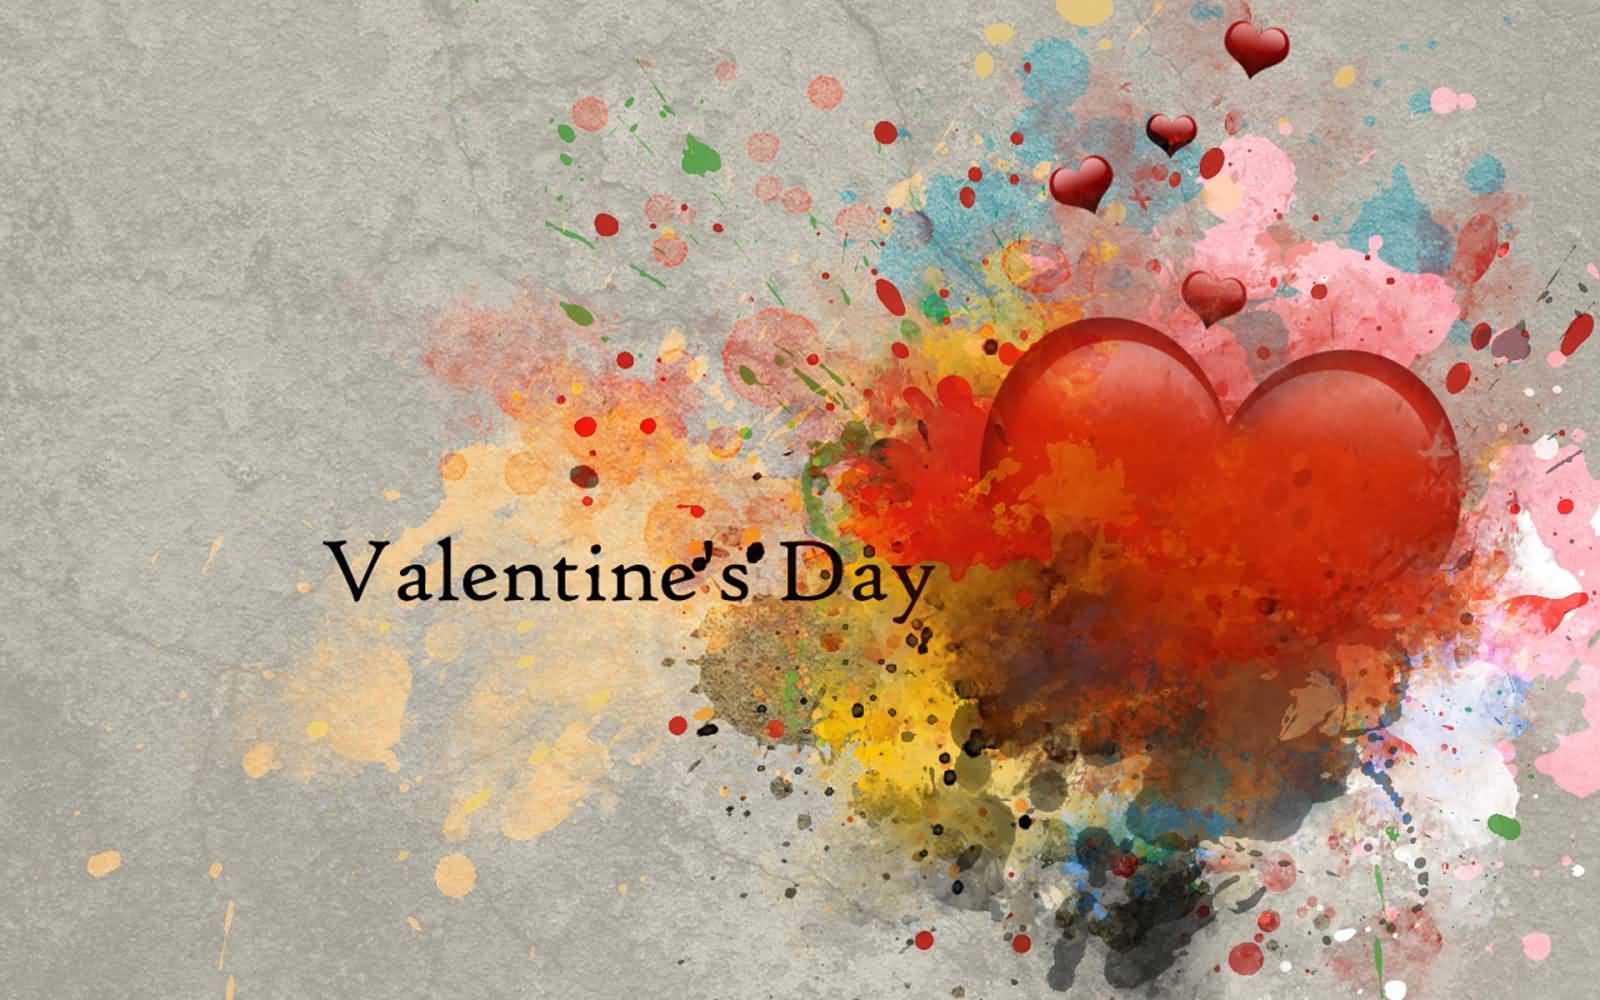 Valentine’s Day Hearts Painting Wallpaper